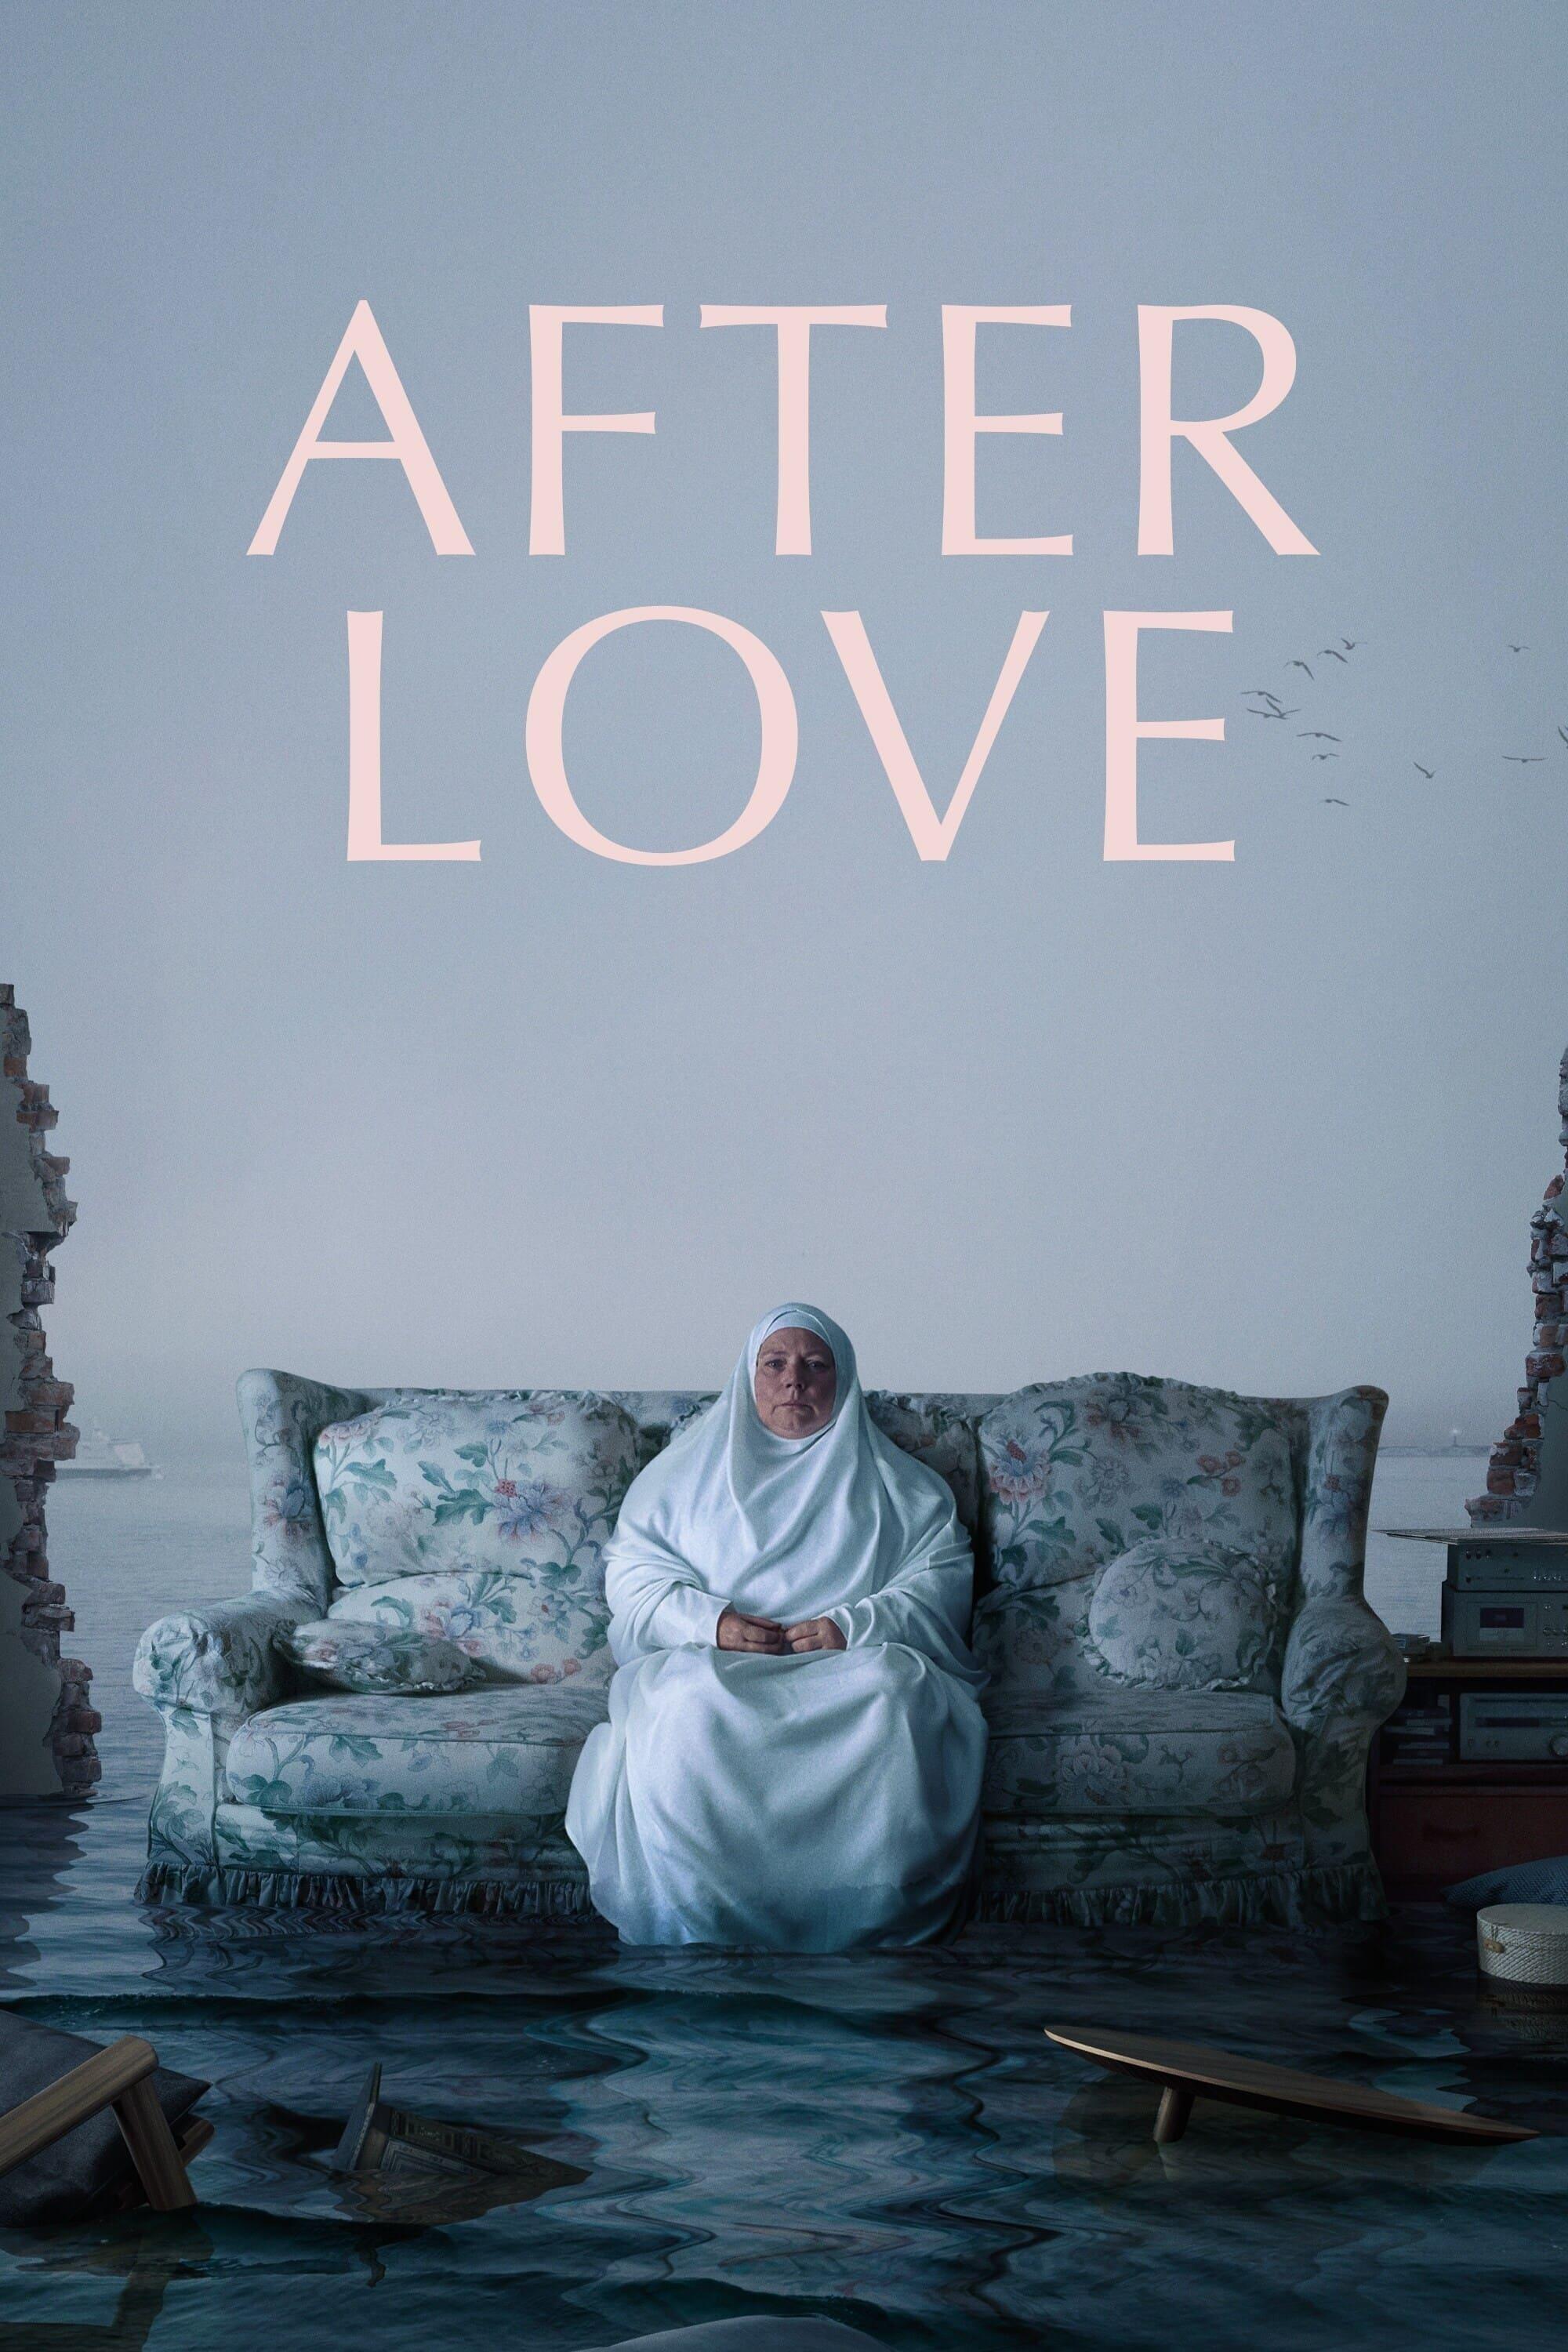 After Love poster